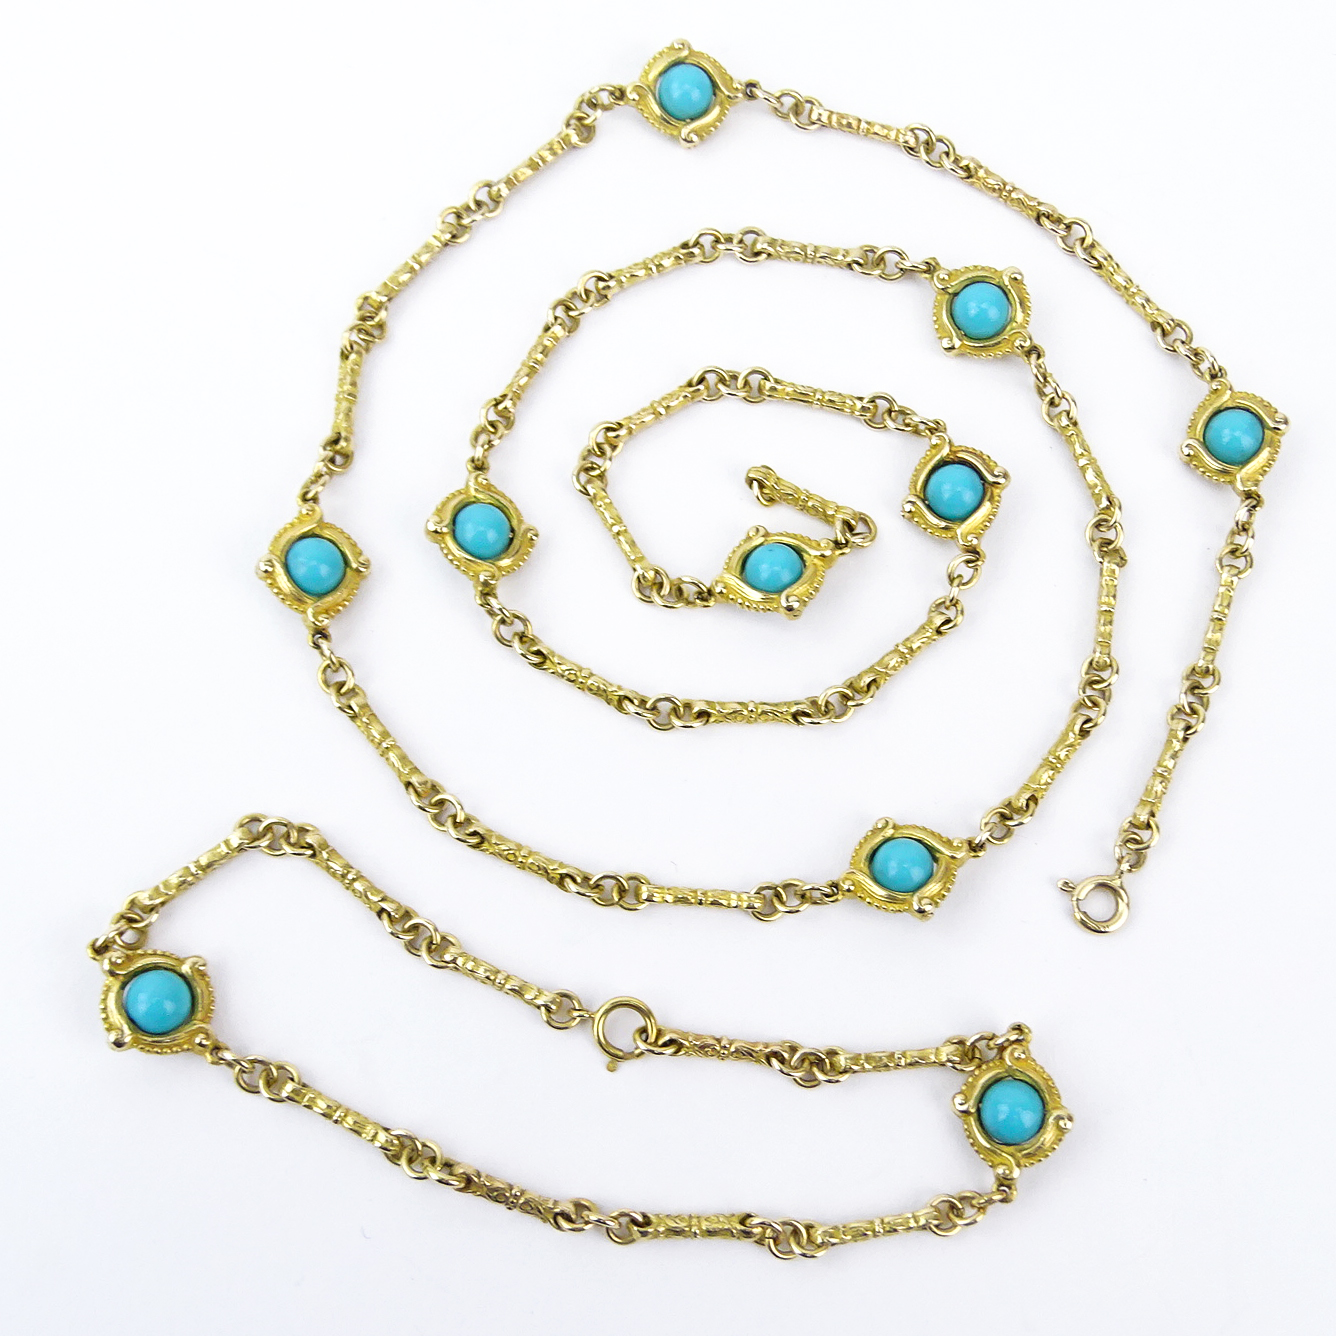 Vintage 14 Karat Yellow Gold and Turquoise Bead Necklace